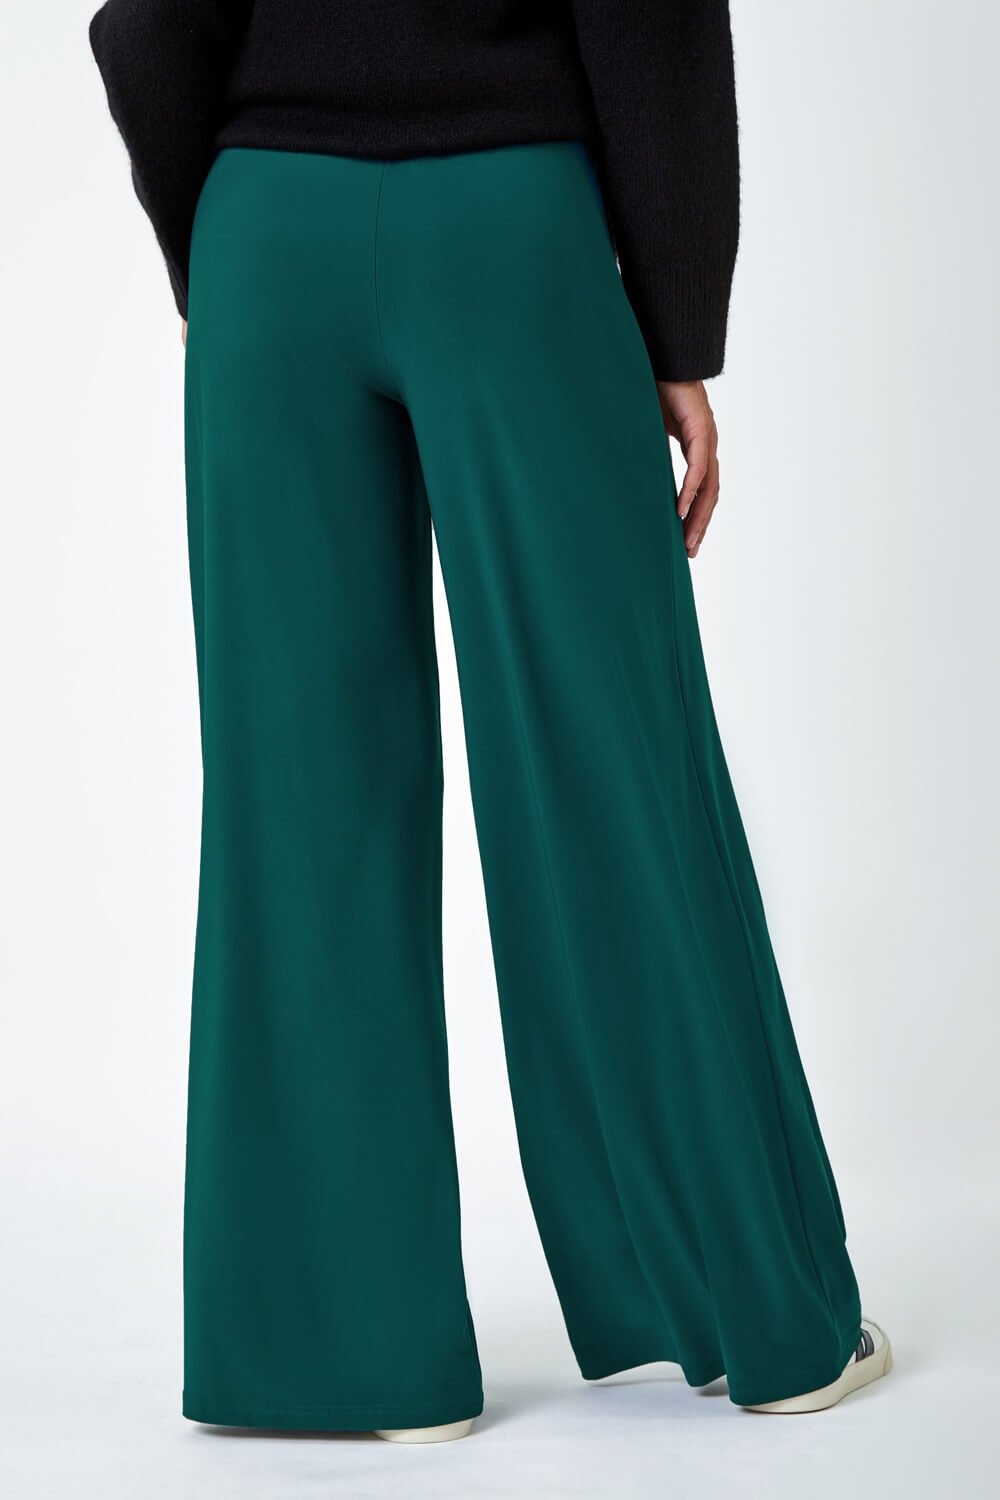 Teal Wide Leg Stretch Trousers, Image 3 of 5